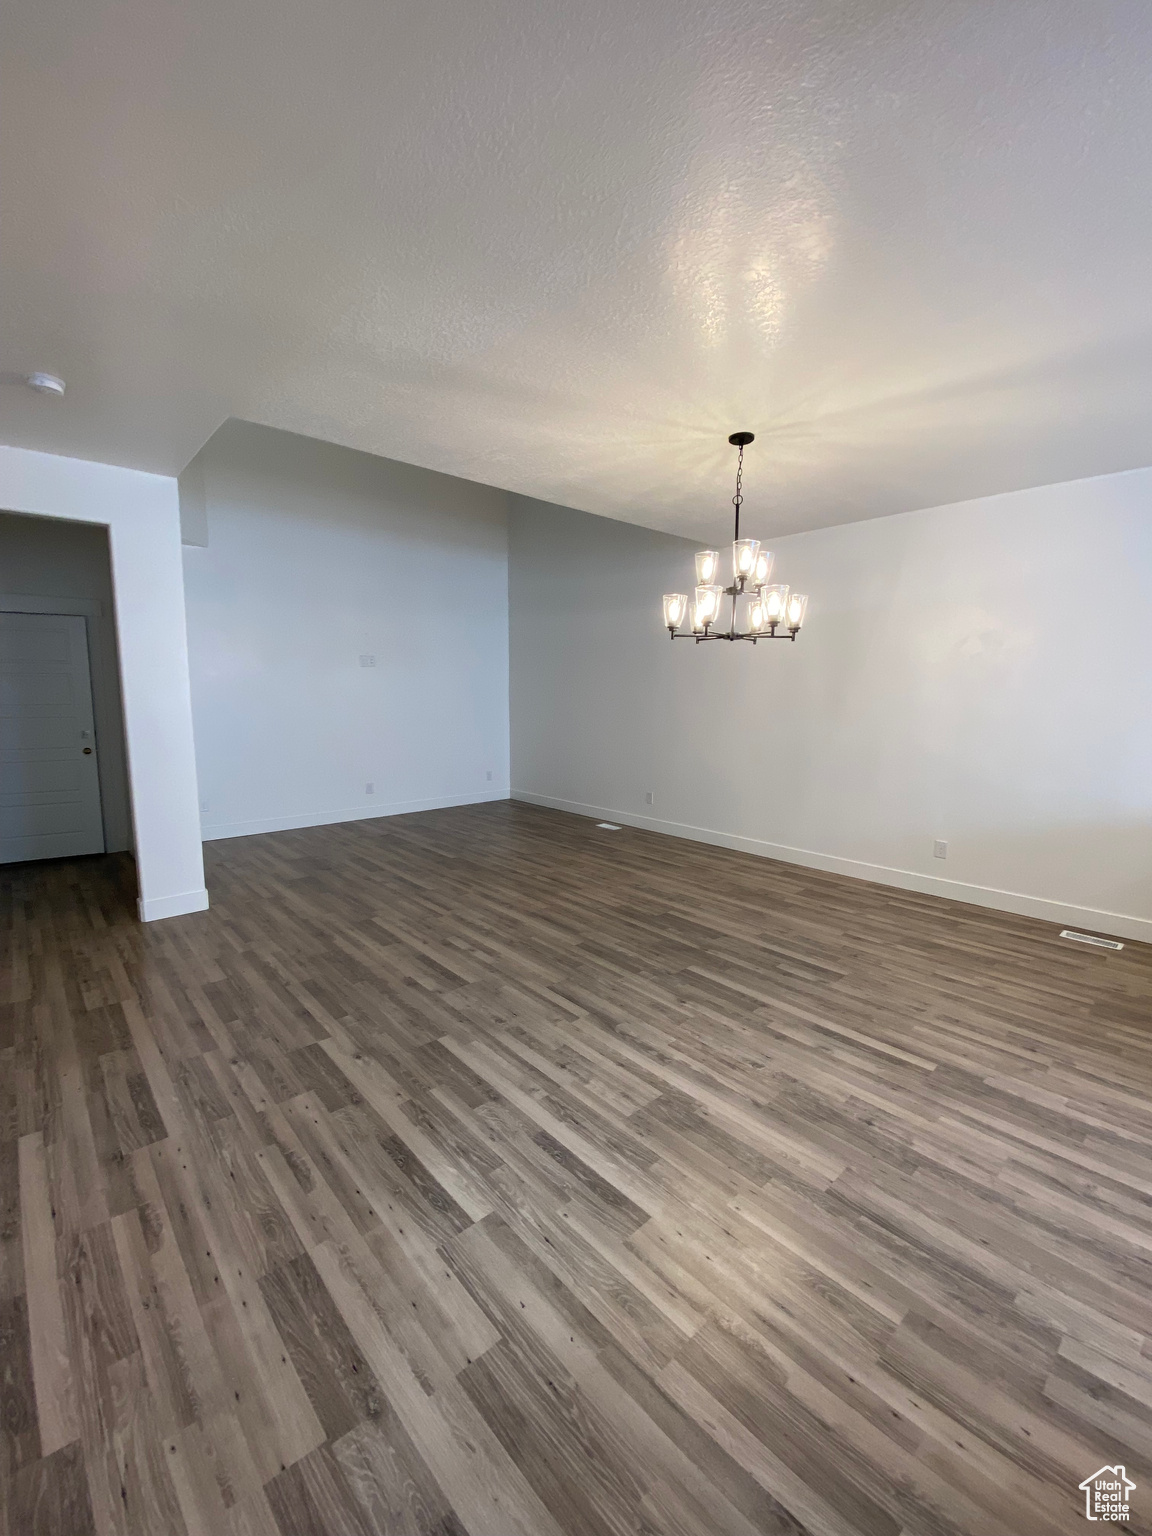 Spare room with dark hardwood / wood-style floors, a chandelier, and a textured ceiling